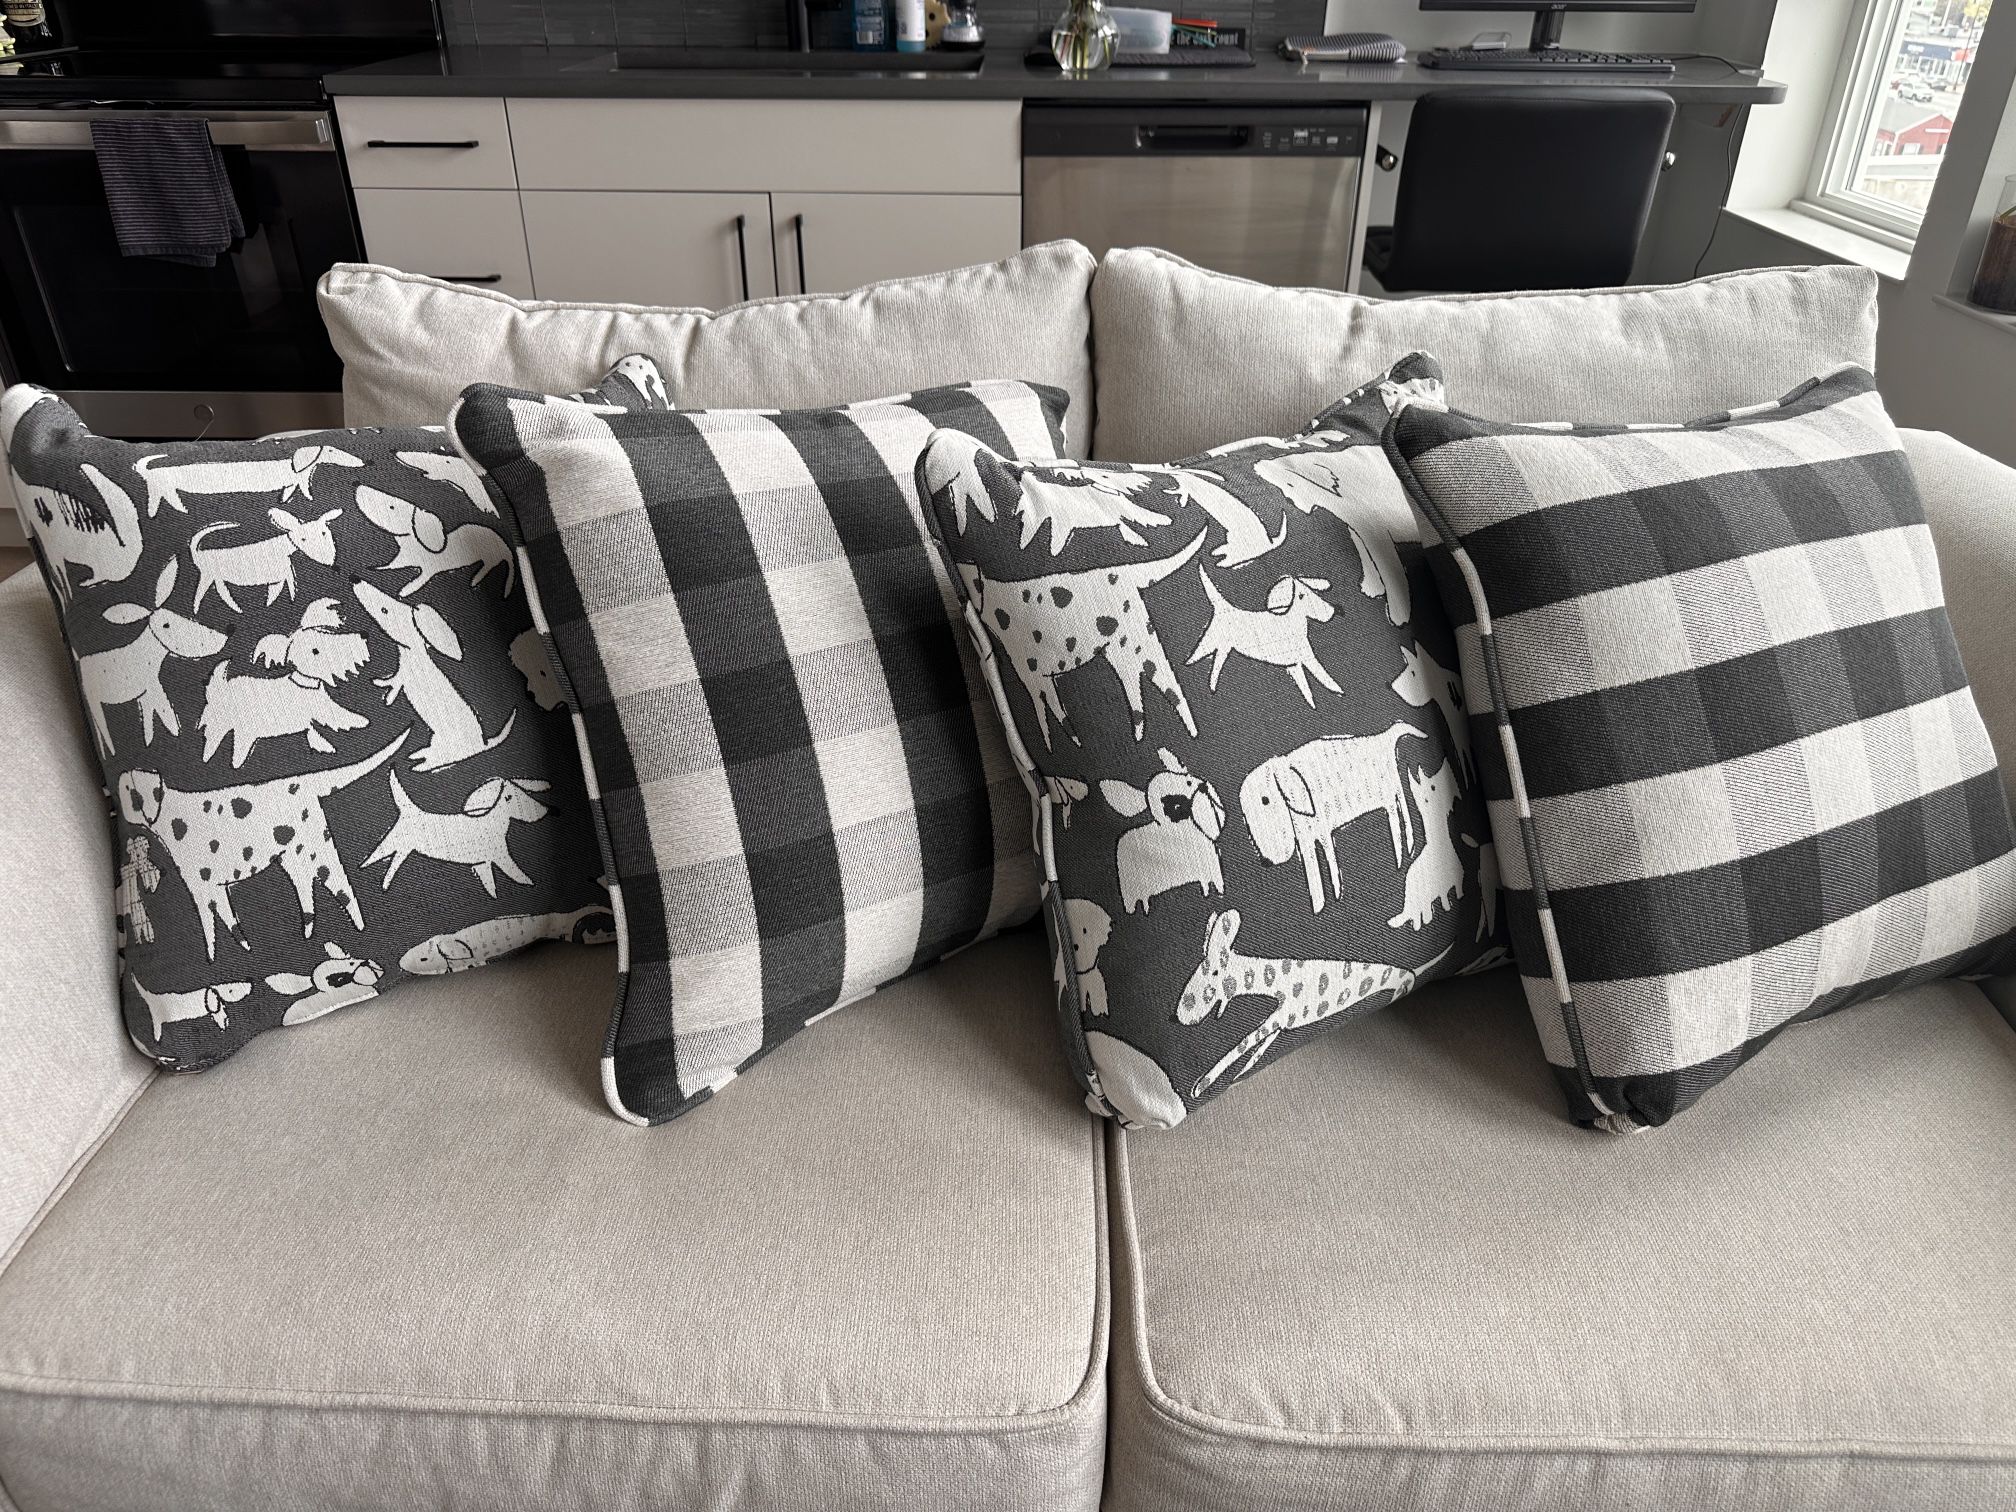 Four Cute Decorative Couch Pillows